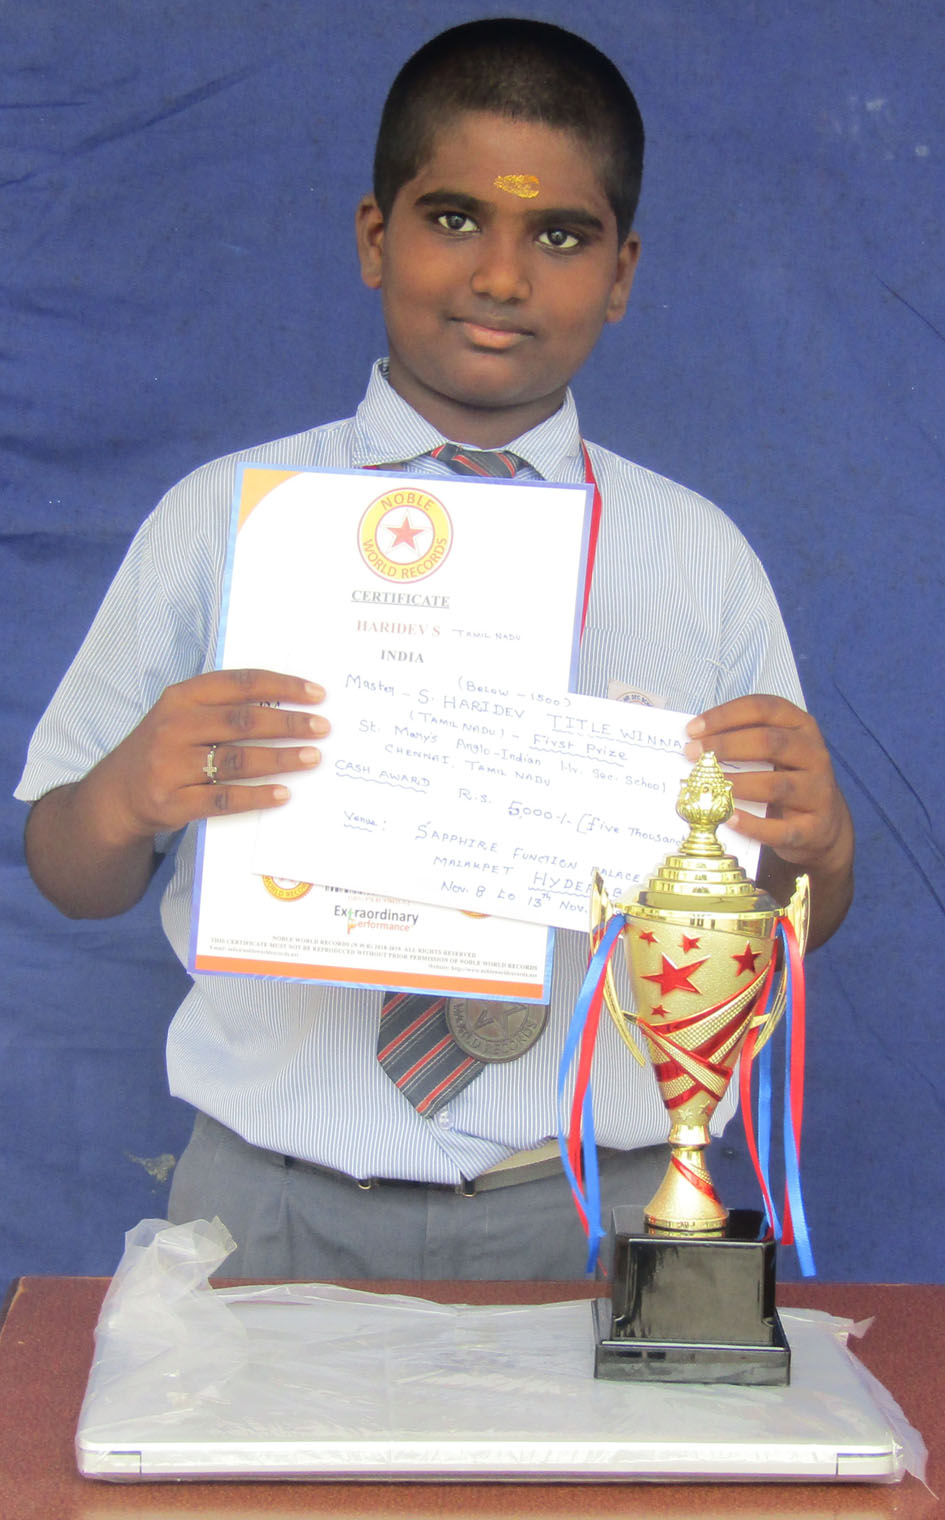 MASTER HARIDESH S 5A Secured the Ist place in the Chess competition organised by Kilpauk Chess centre &  IIIrd place FIDE rated Chess Tournament organised by Valliammai Trust.